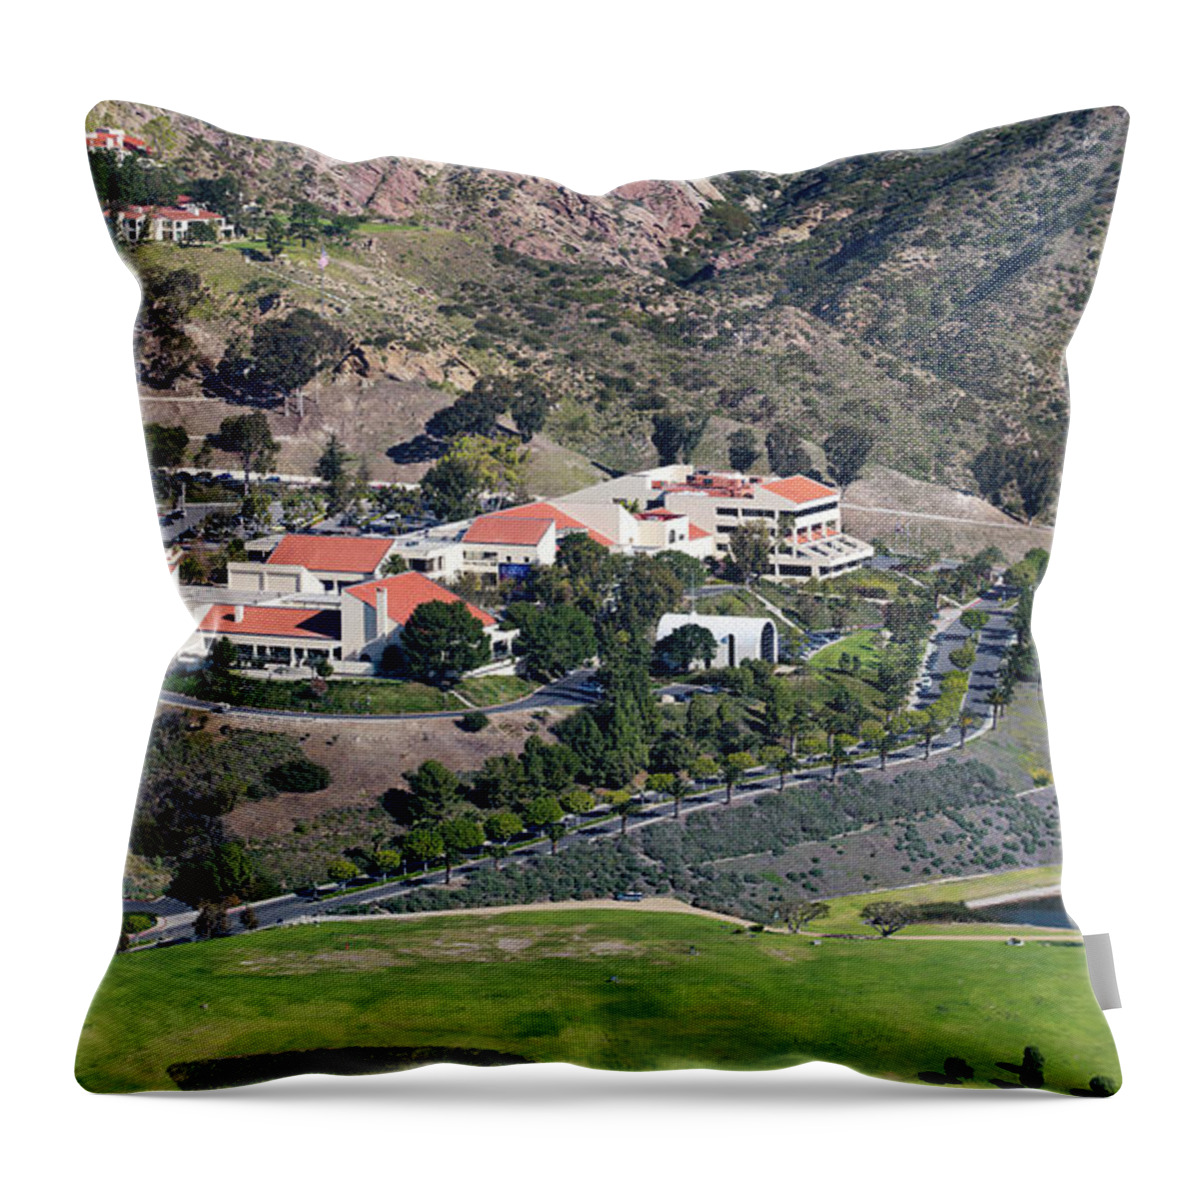 Photography Throw Pillow featuring the photograph Pepperdine University On A Hill by Panoramic Images